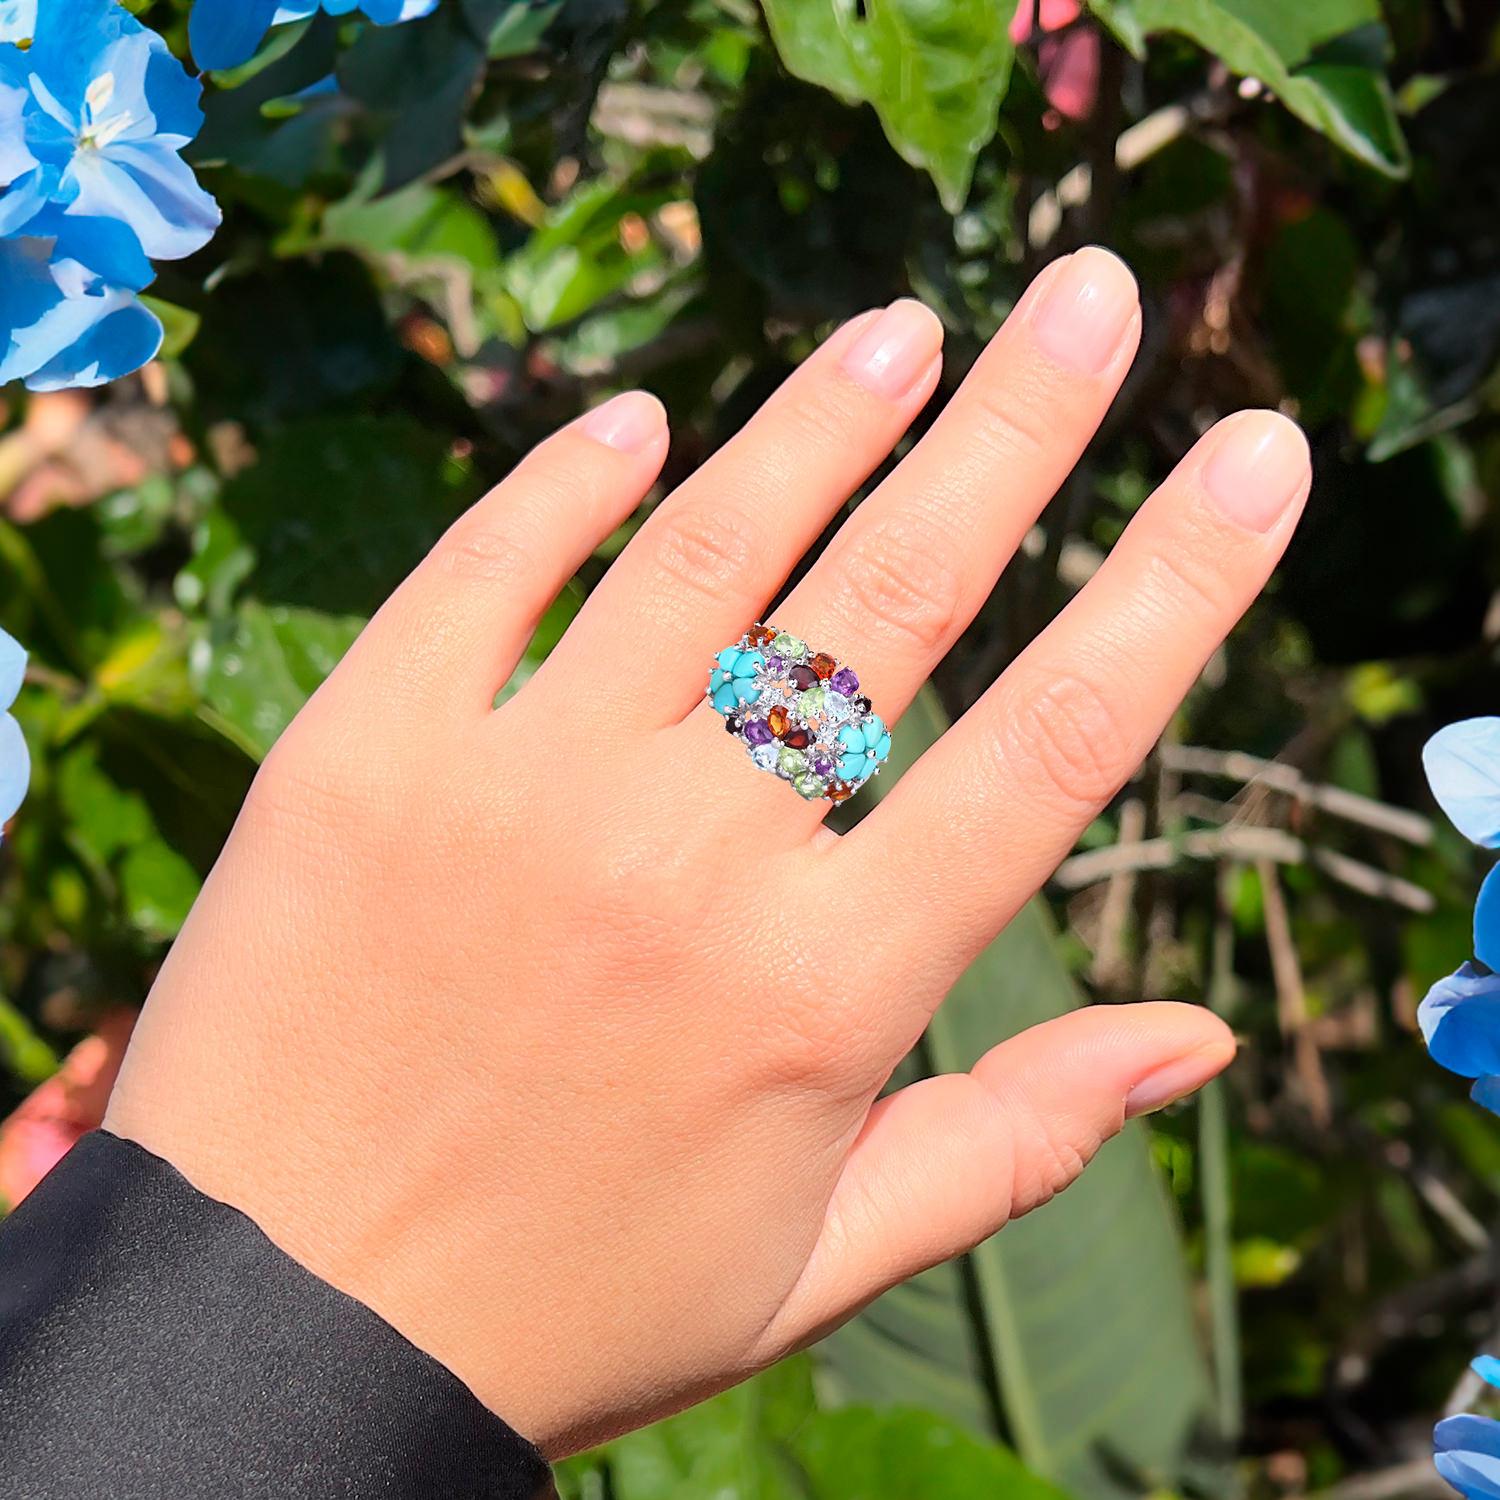 Mixed Cut Multicolor Gemstones Cluster Flower Ring 4.06 Carats For Sale